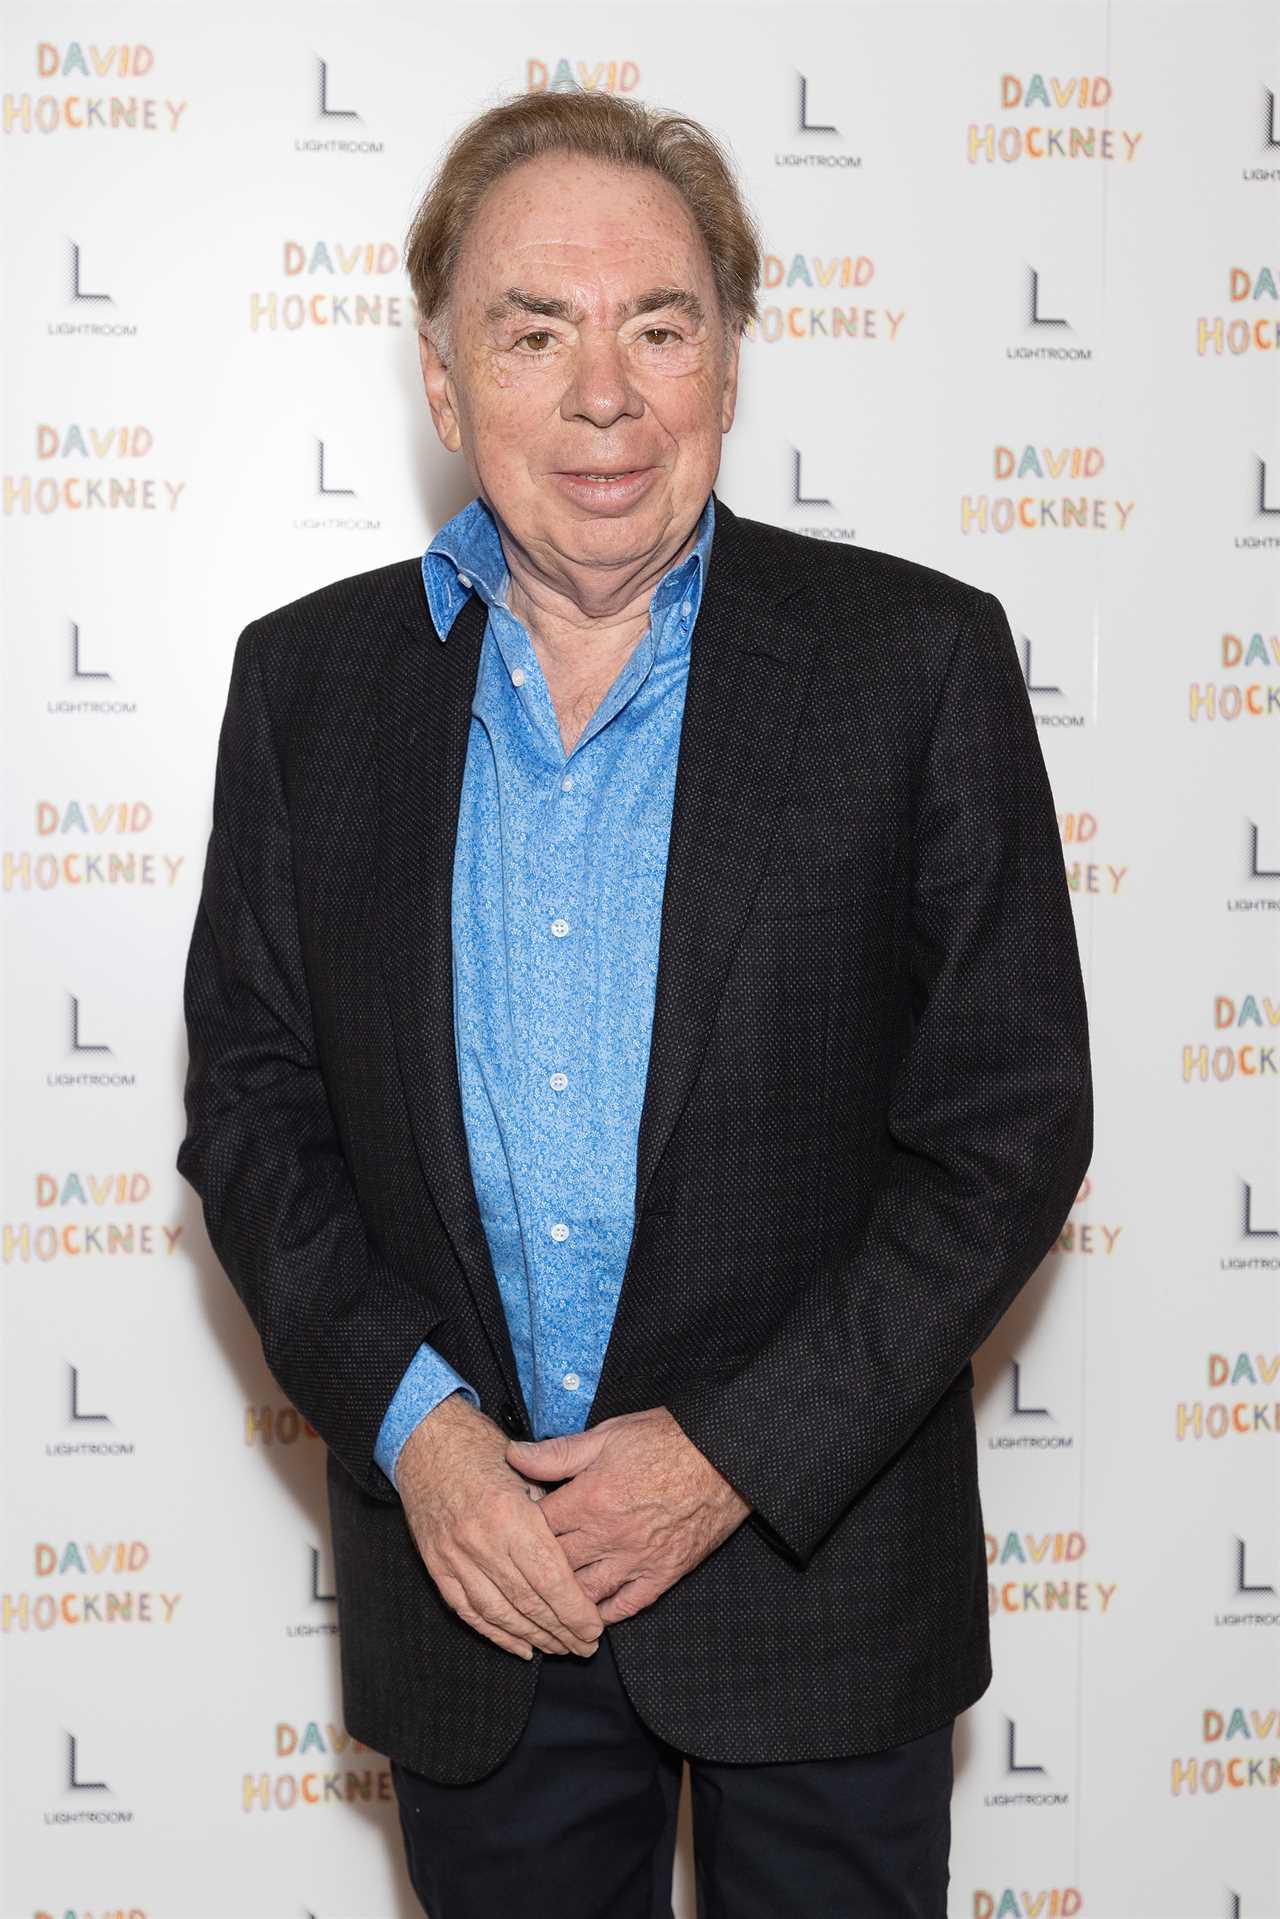 As Andrew Lloyd Webber reveals his son’s critical stomach cancer diagnosis – the 9 signs you must know